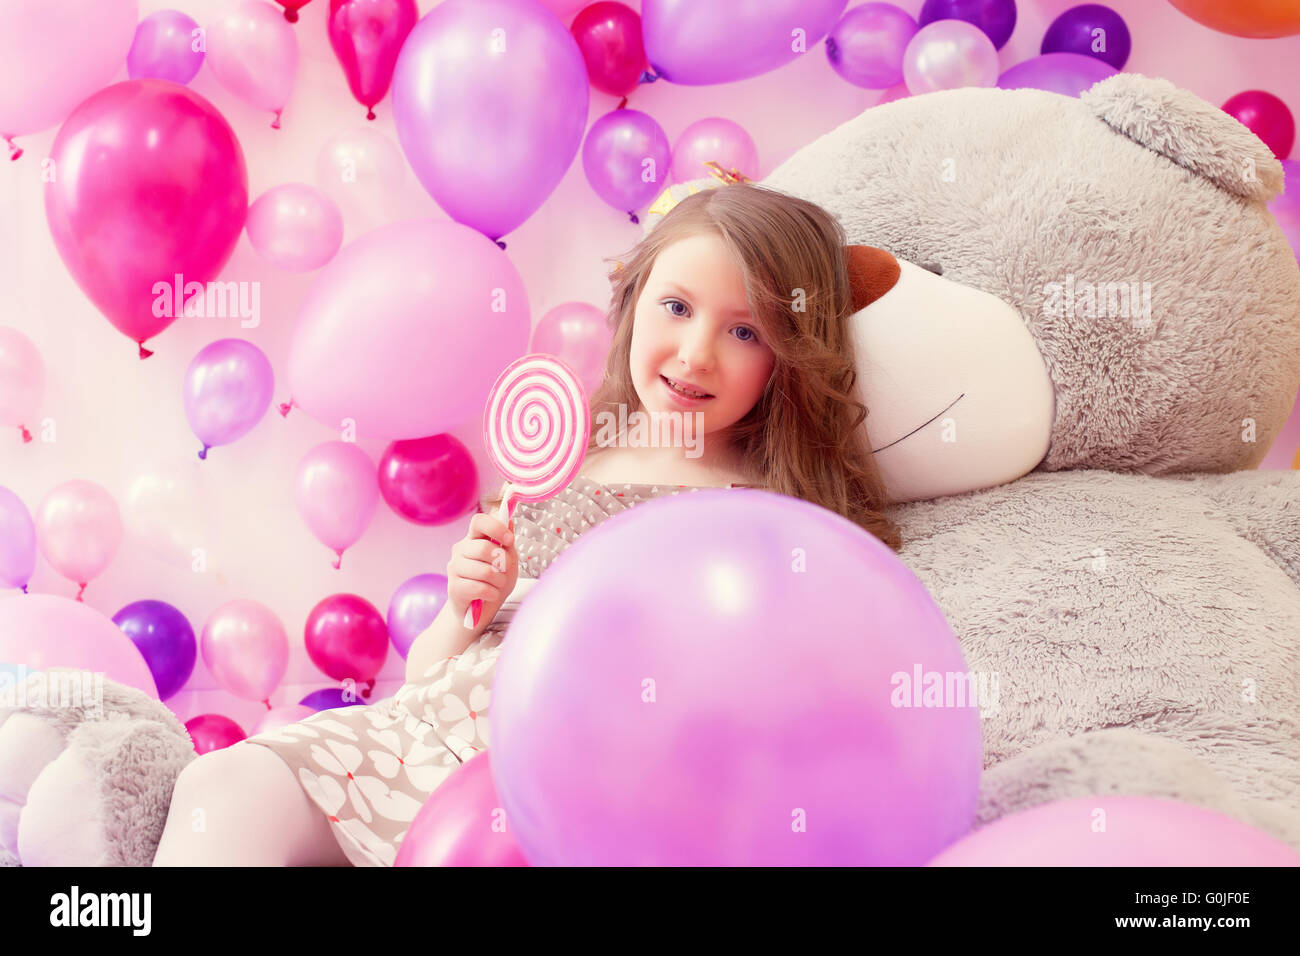 Cute girl with lollipop posing looking at camera Banque D'Images